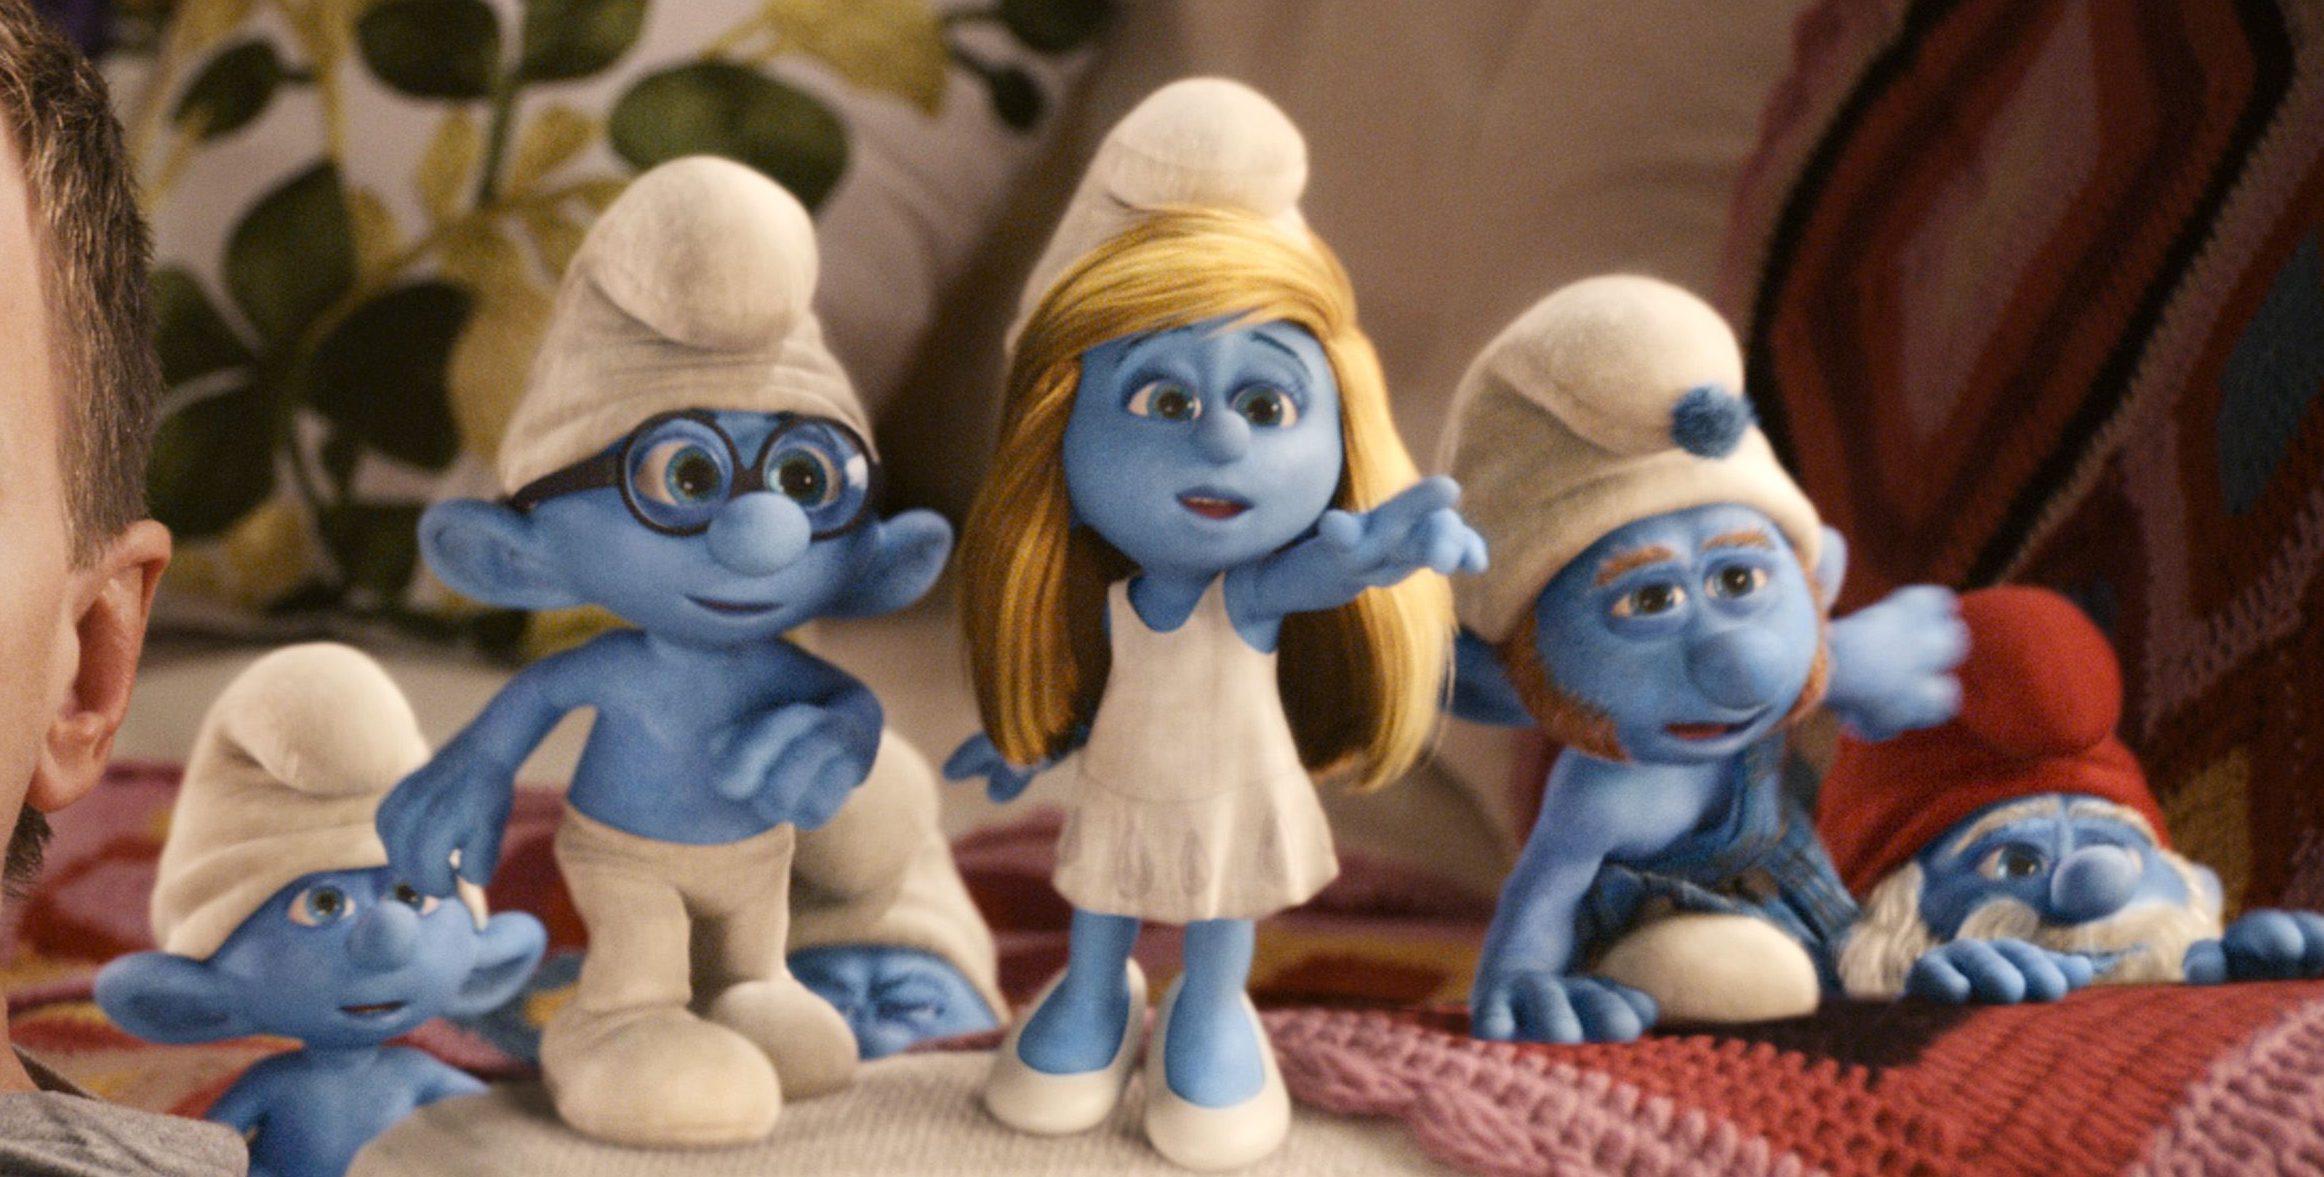 Neil Patrick Harris as "Patrick" with Clumsy, Briany, Smurfette, Gutsy and Papa Smurf in Columbia Pictures' THE SMURFS.